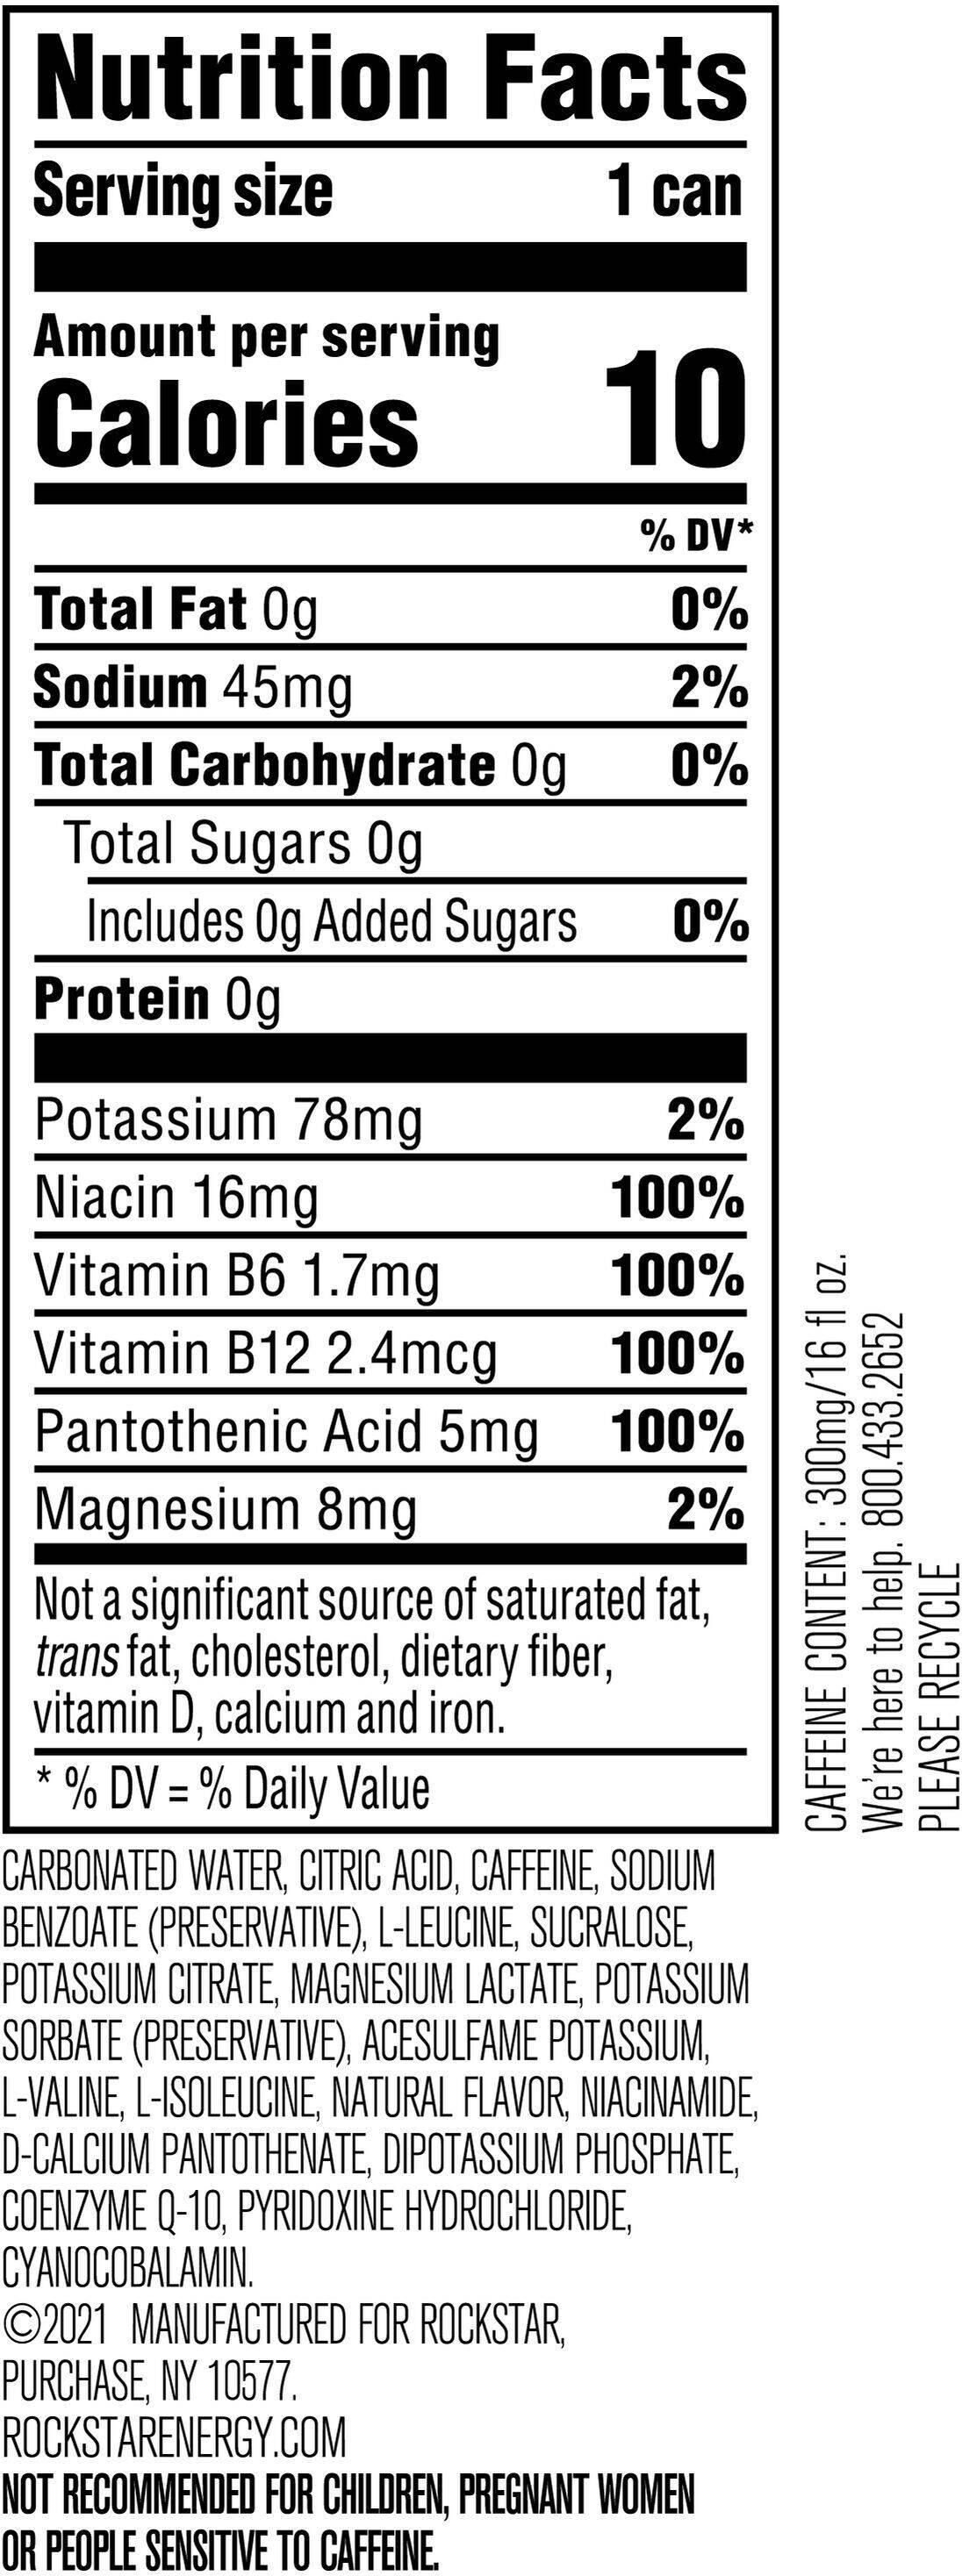 Image describing nutrition information for product Rockstar Xdurance Cotton Candy